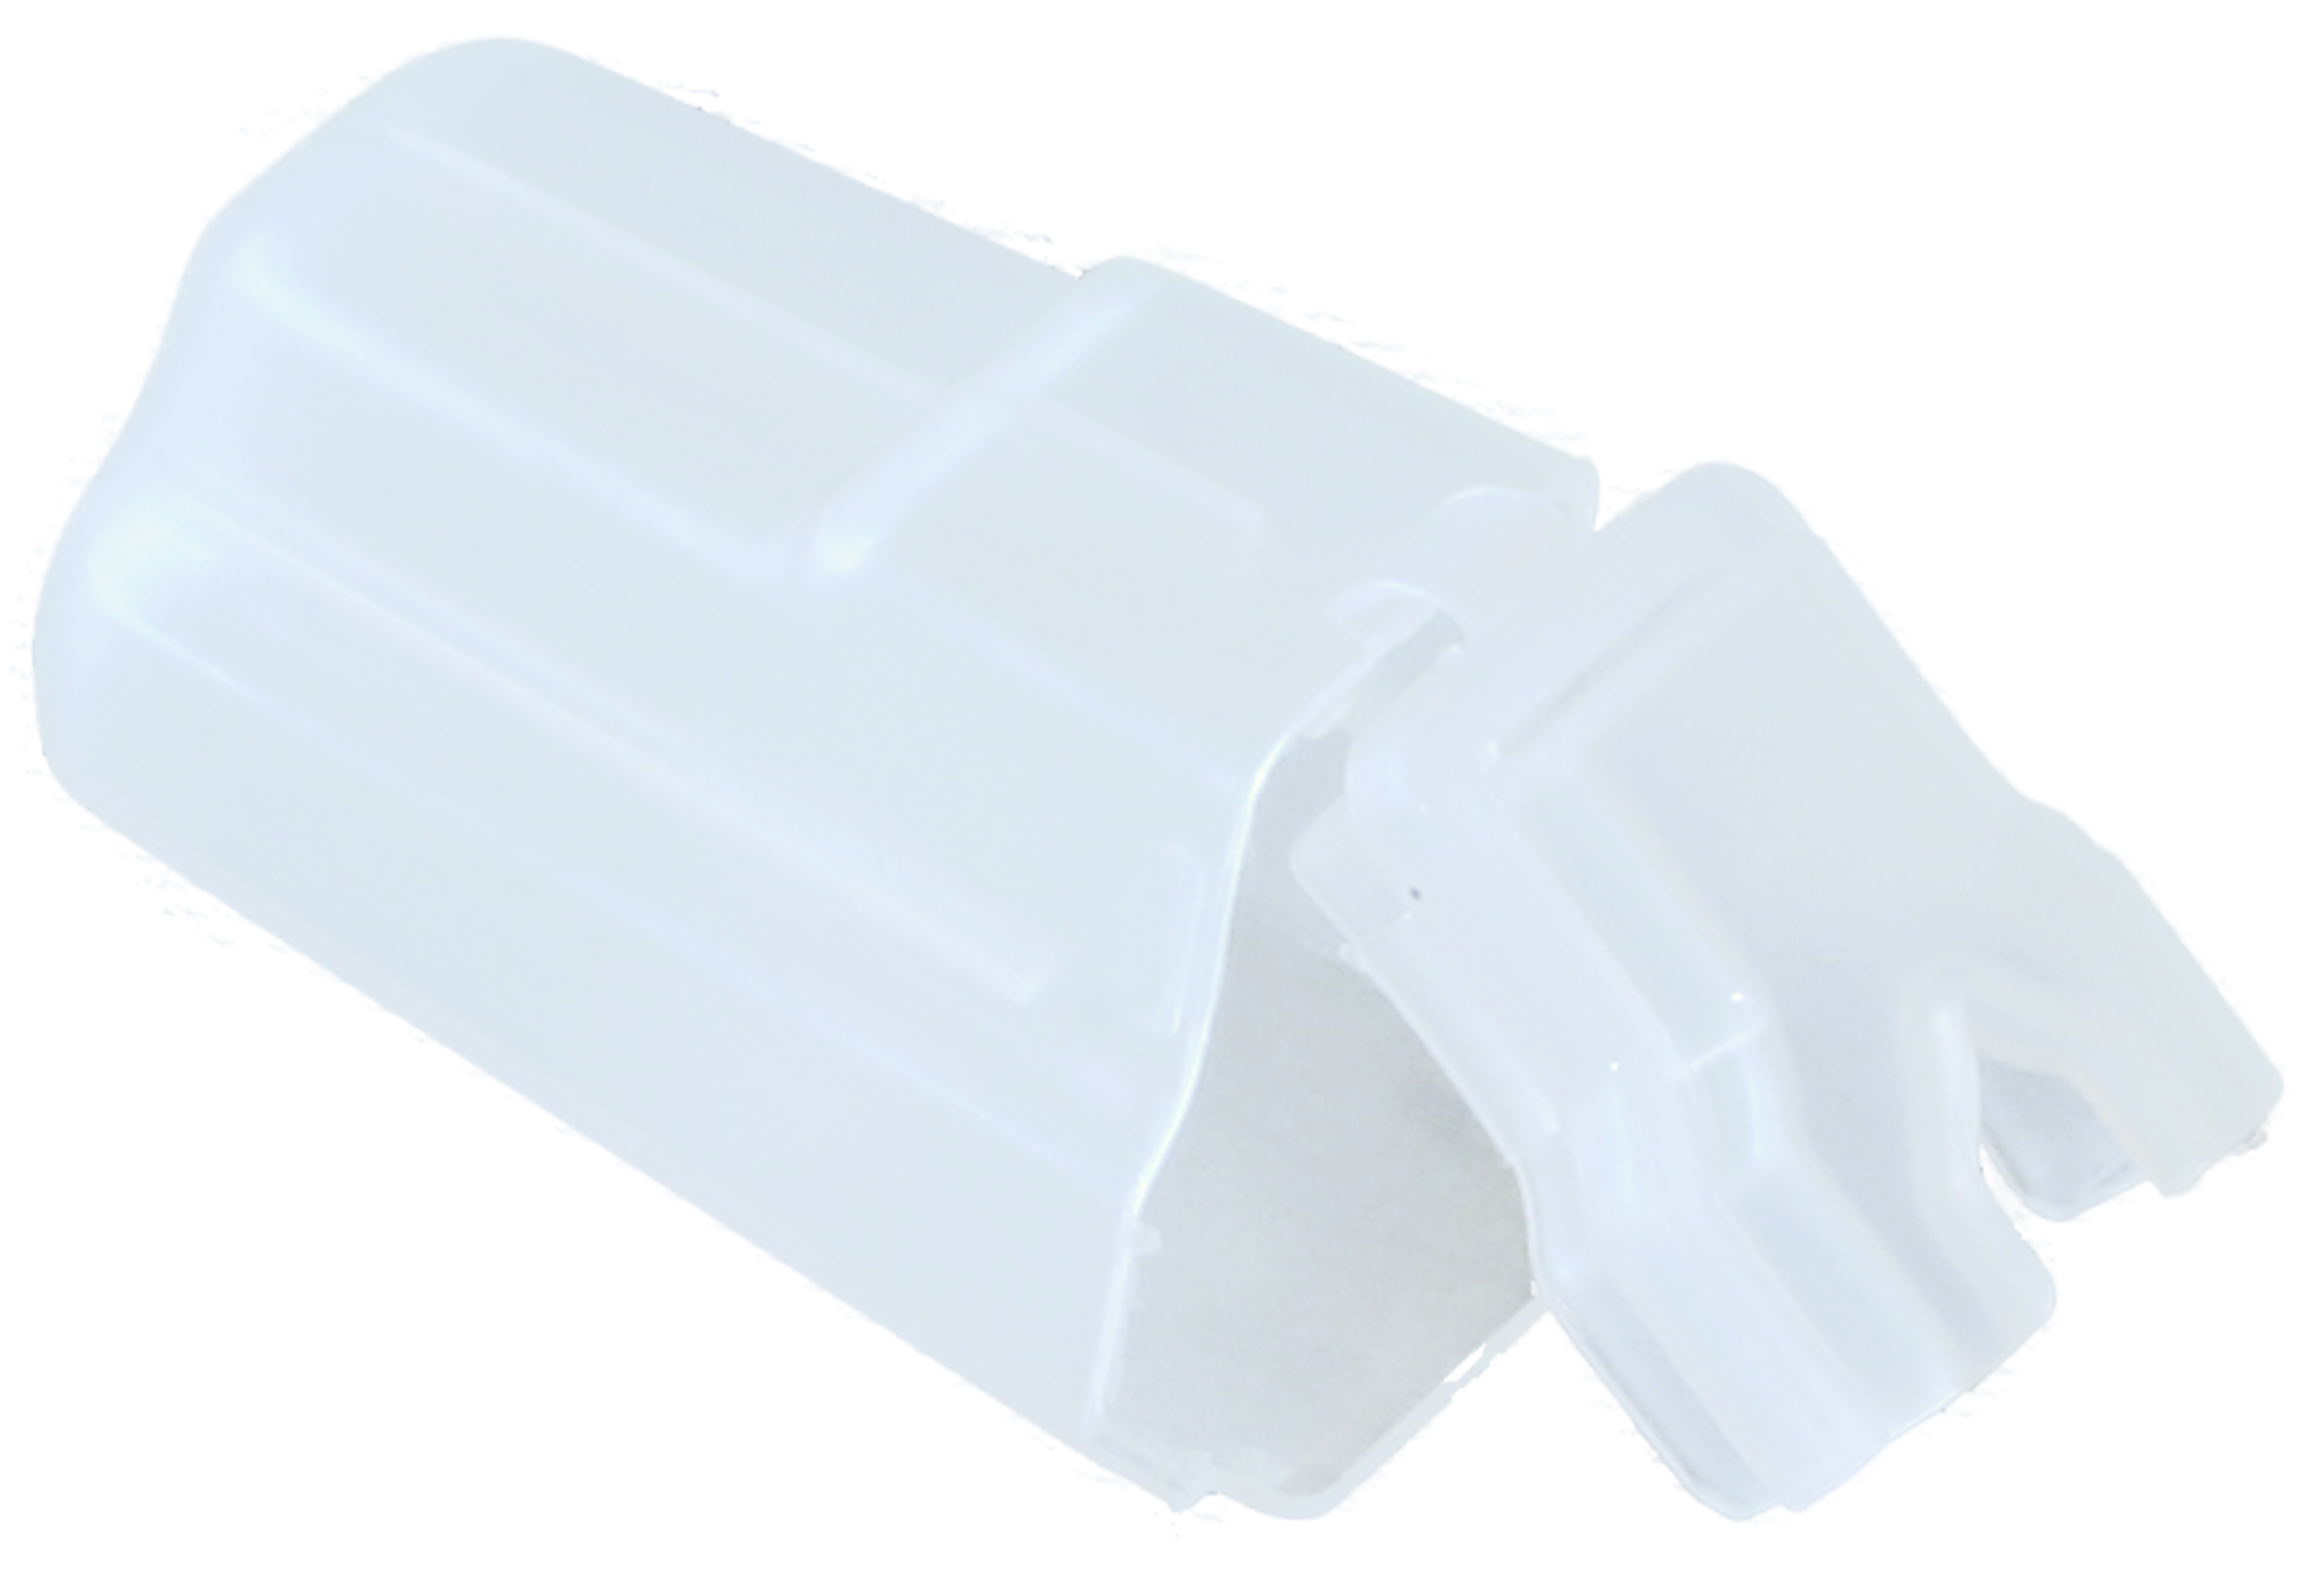 Toothbrush CAPS (Clear)